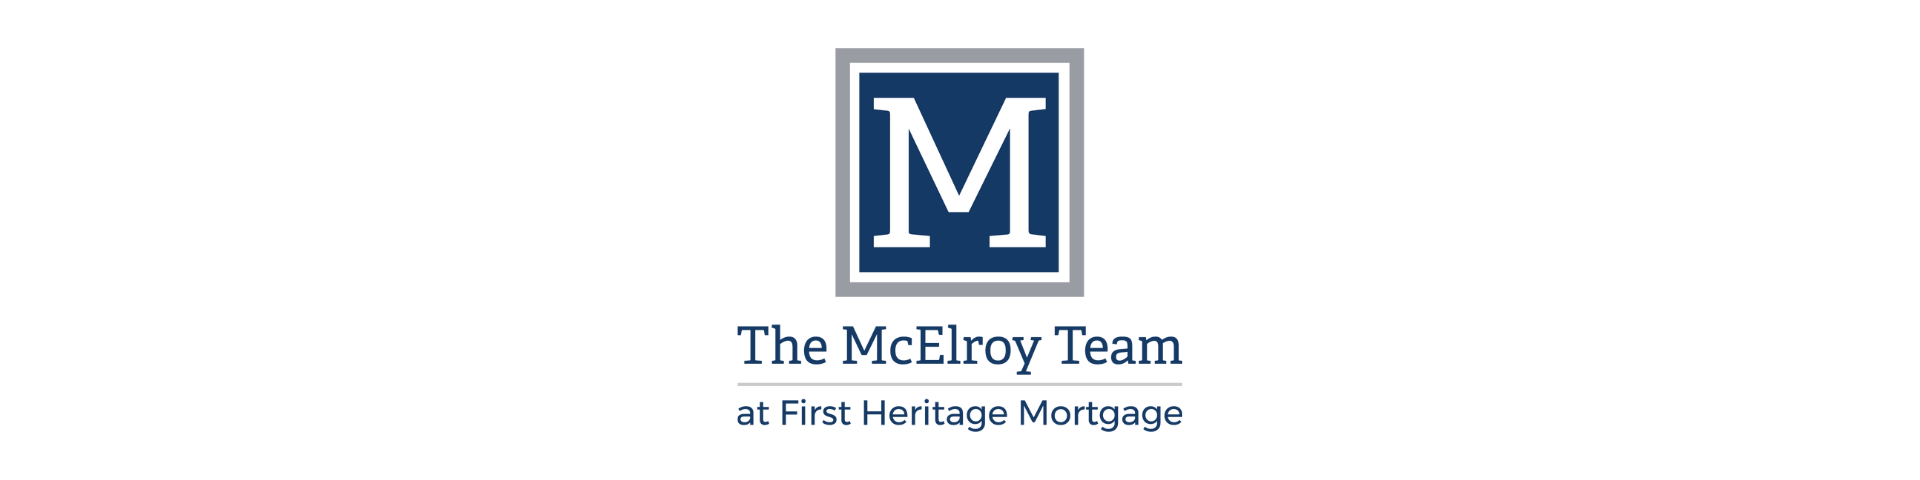 The McElroy Team at First Heritage Mortgage logo